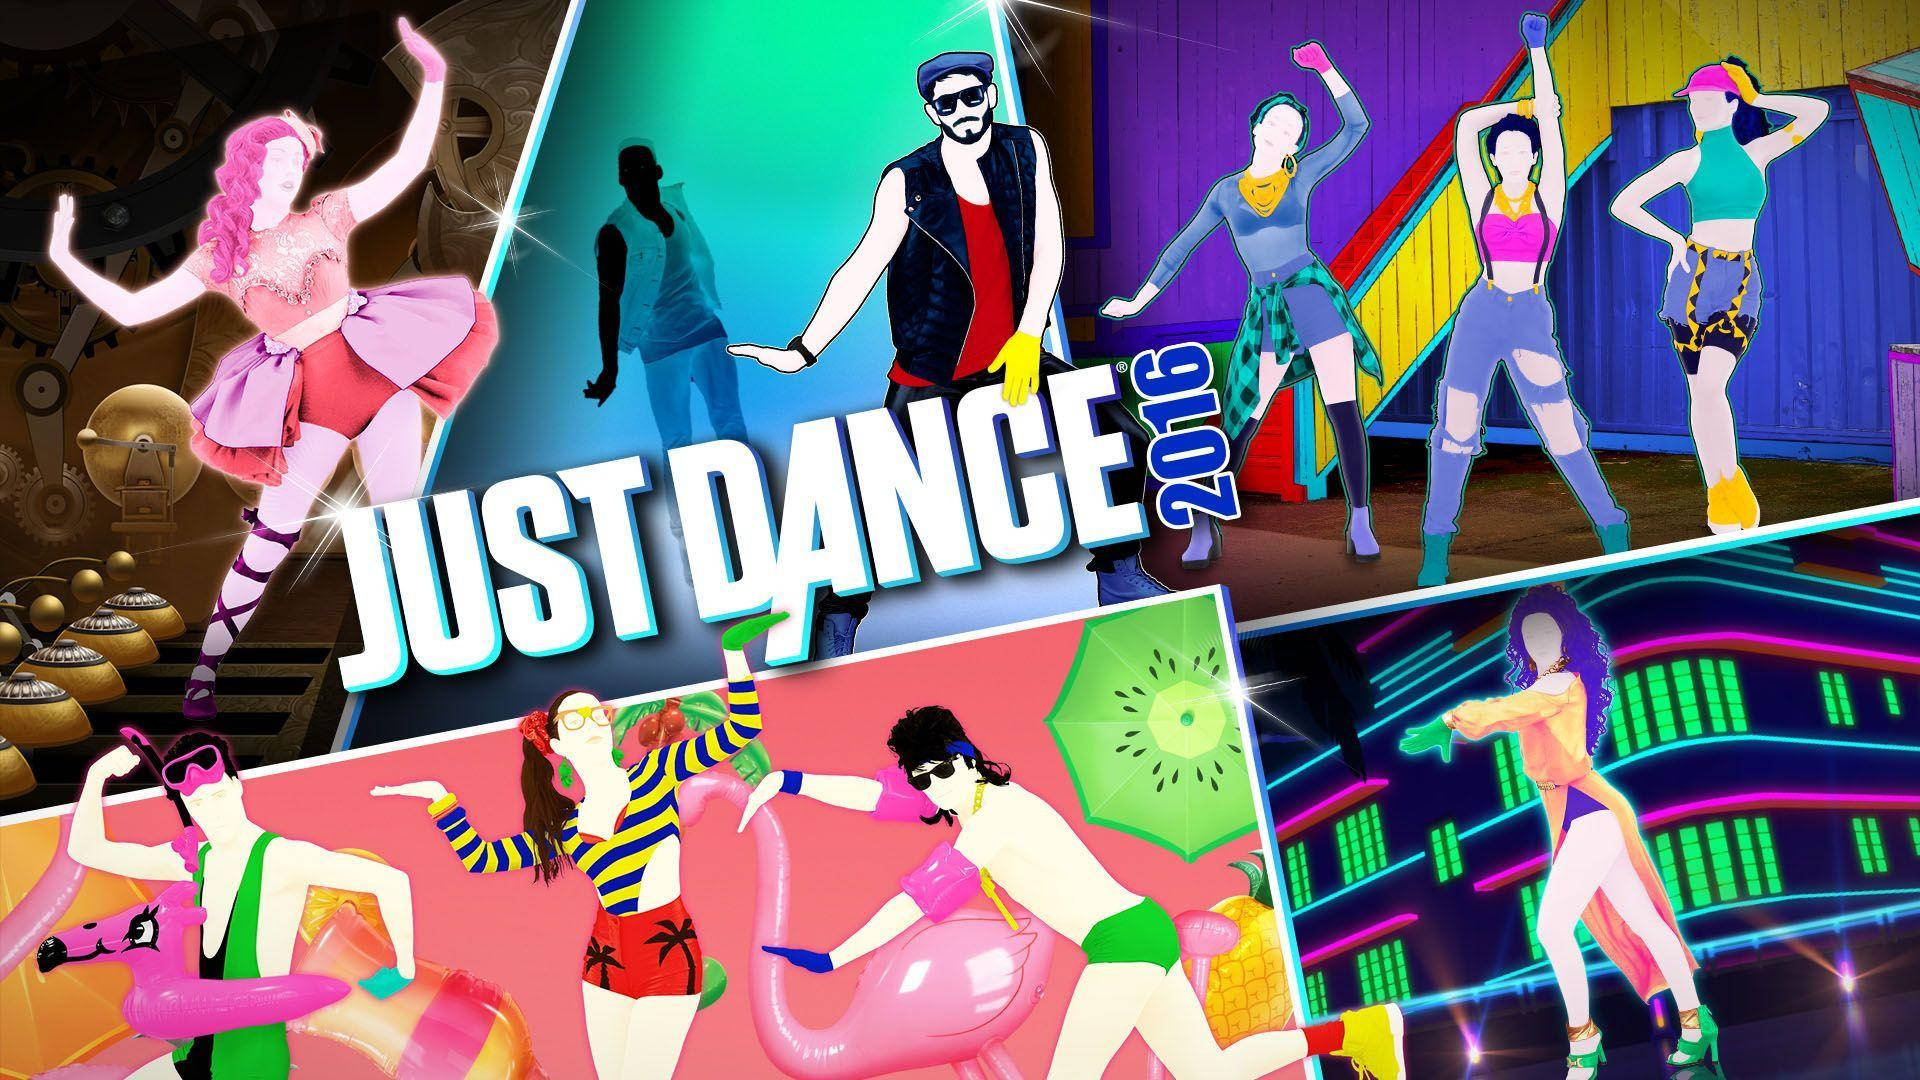 Just Dance 2016 Poster